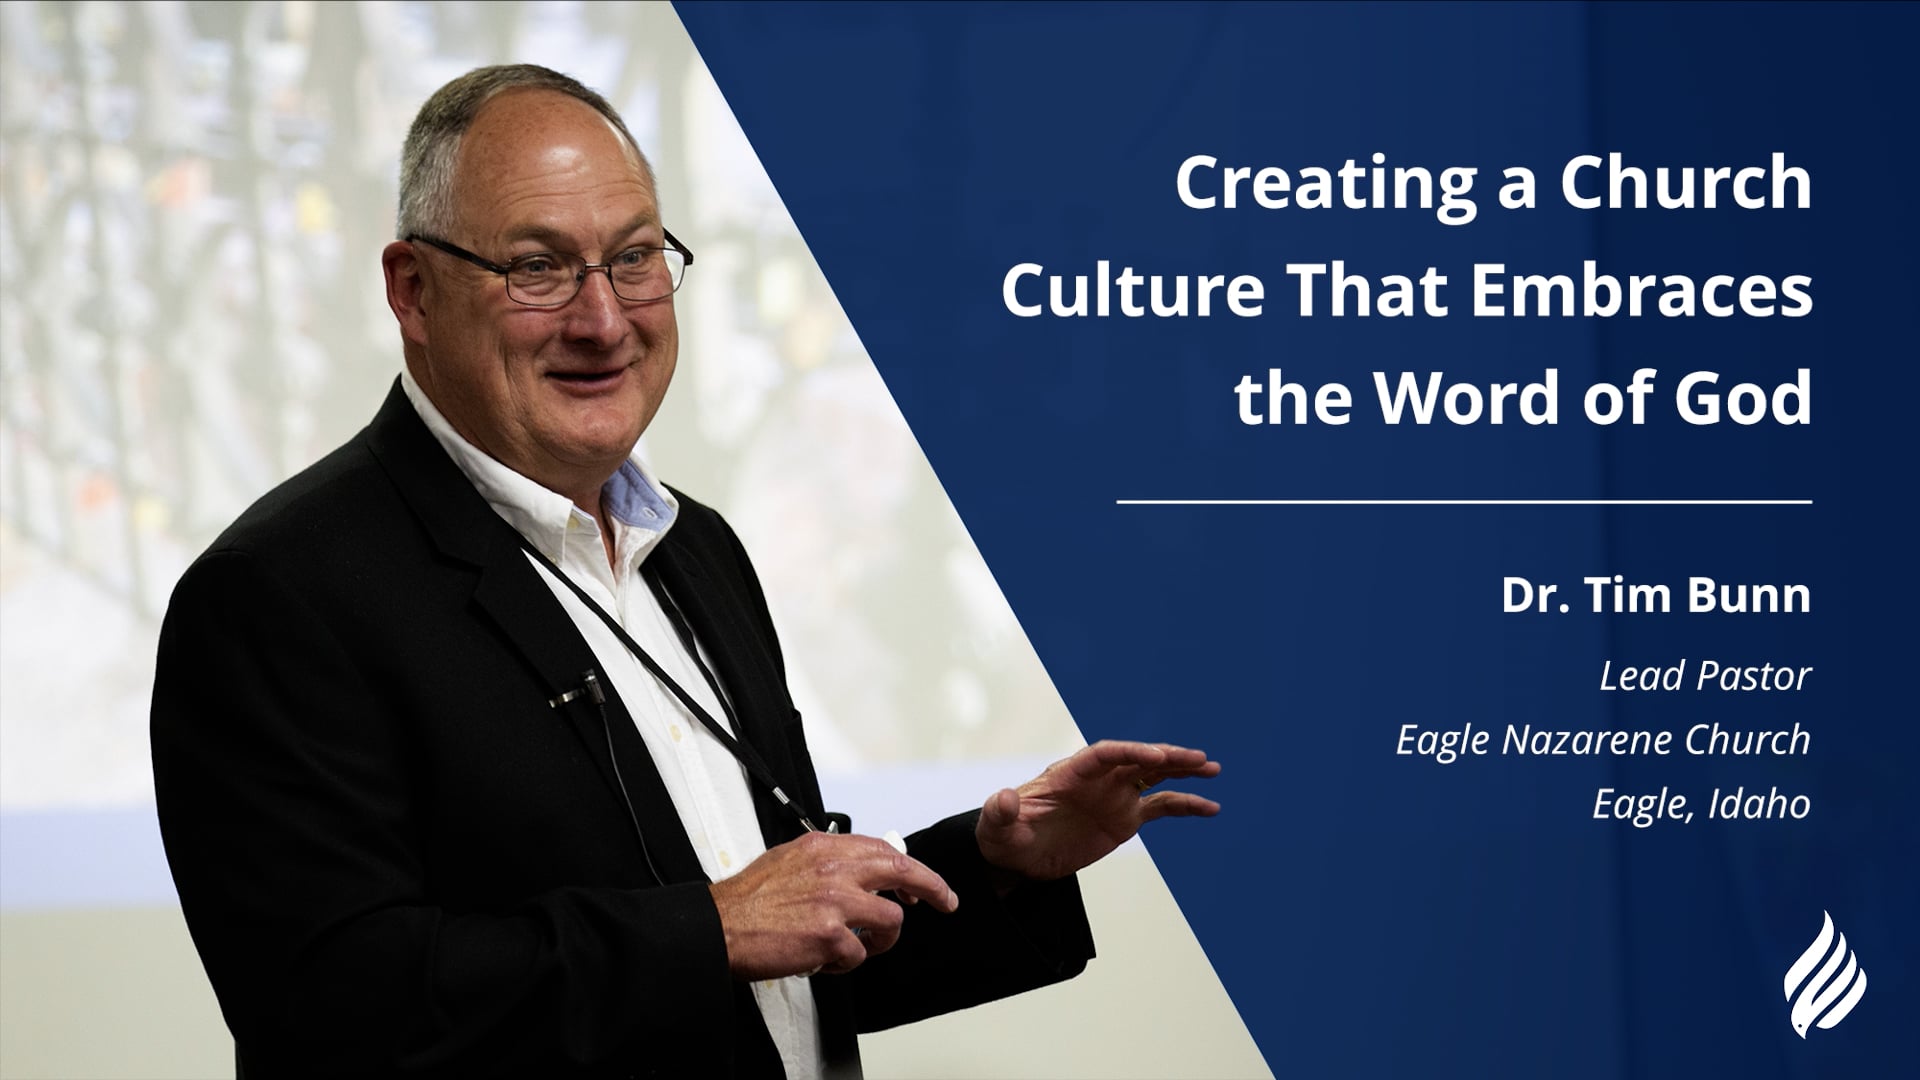 the Gathering 2022 NW | Dr. Tim Bunn: Creating a Church Culture That Embraces the Word of God